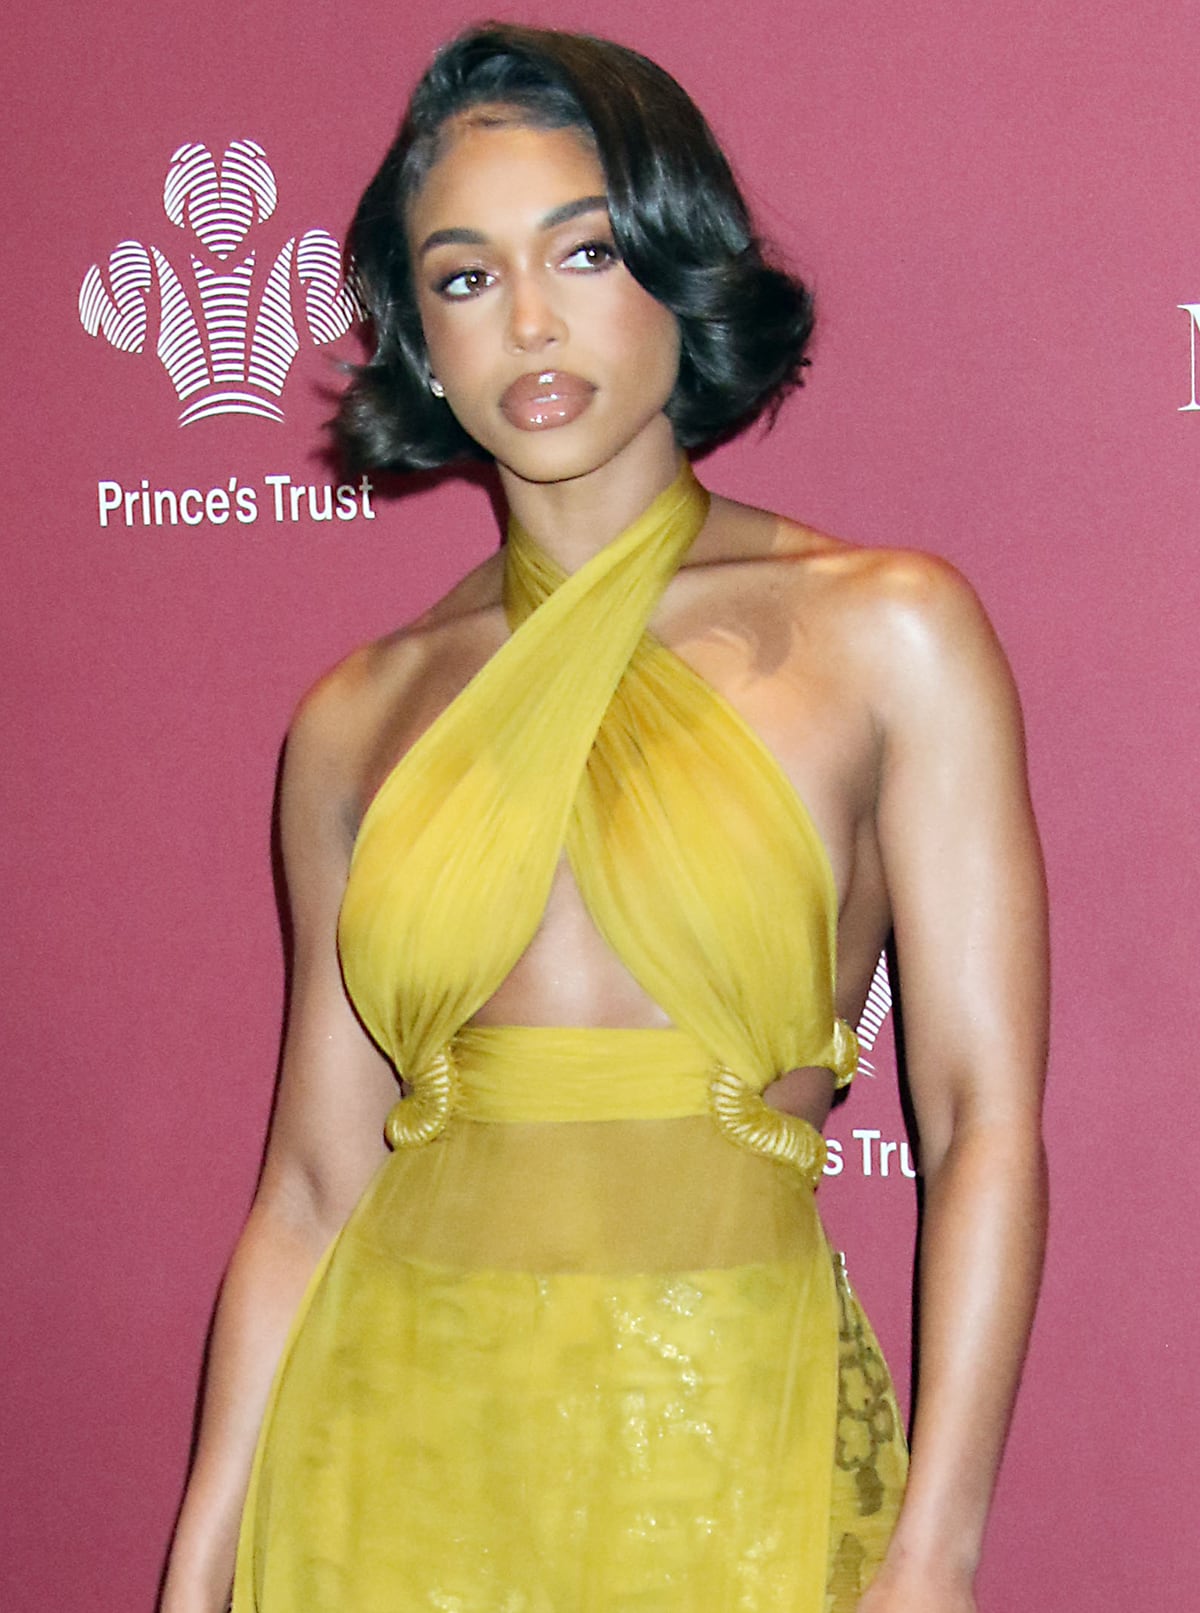 Lori Harvey styles her hair in old Hollywood curled bob and glams up with glossy nude lipstick and rosy cheeks